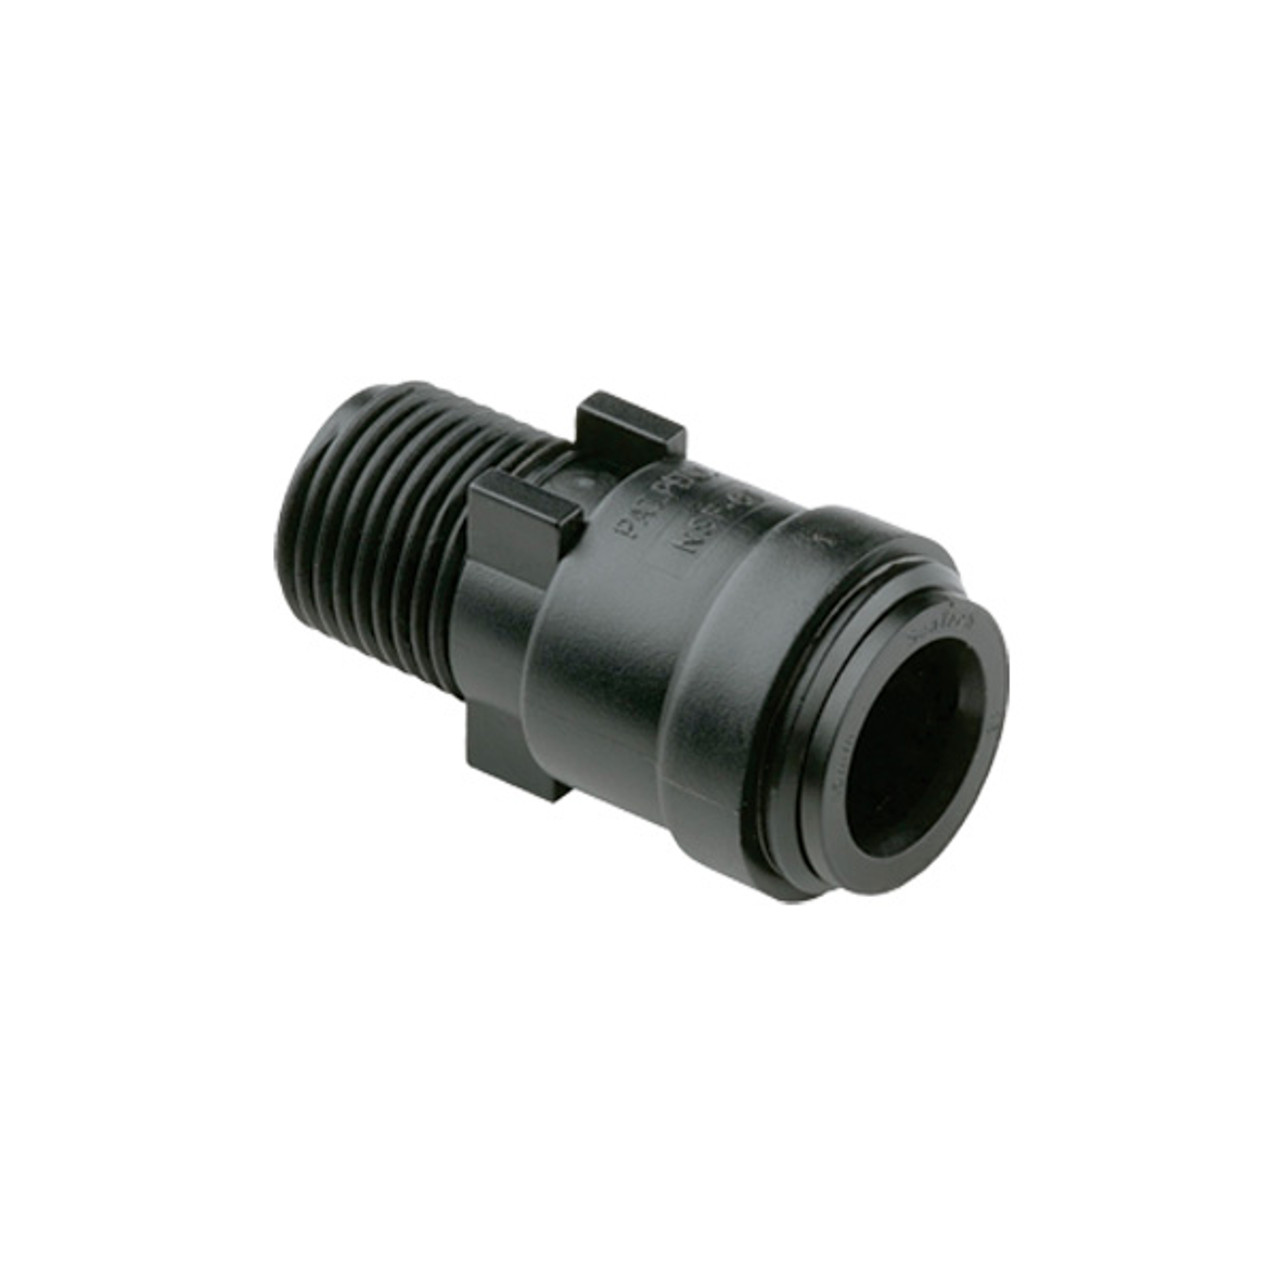 22 millimeter by 3/4 inch male coupling adapter